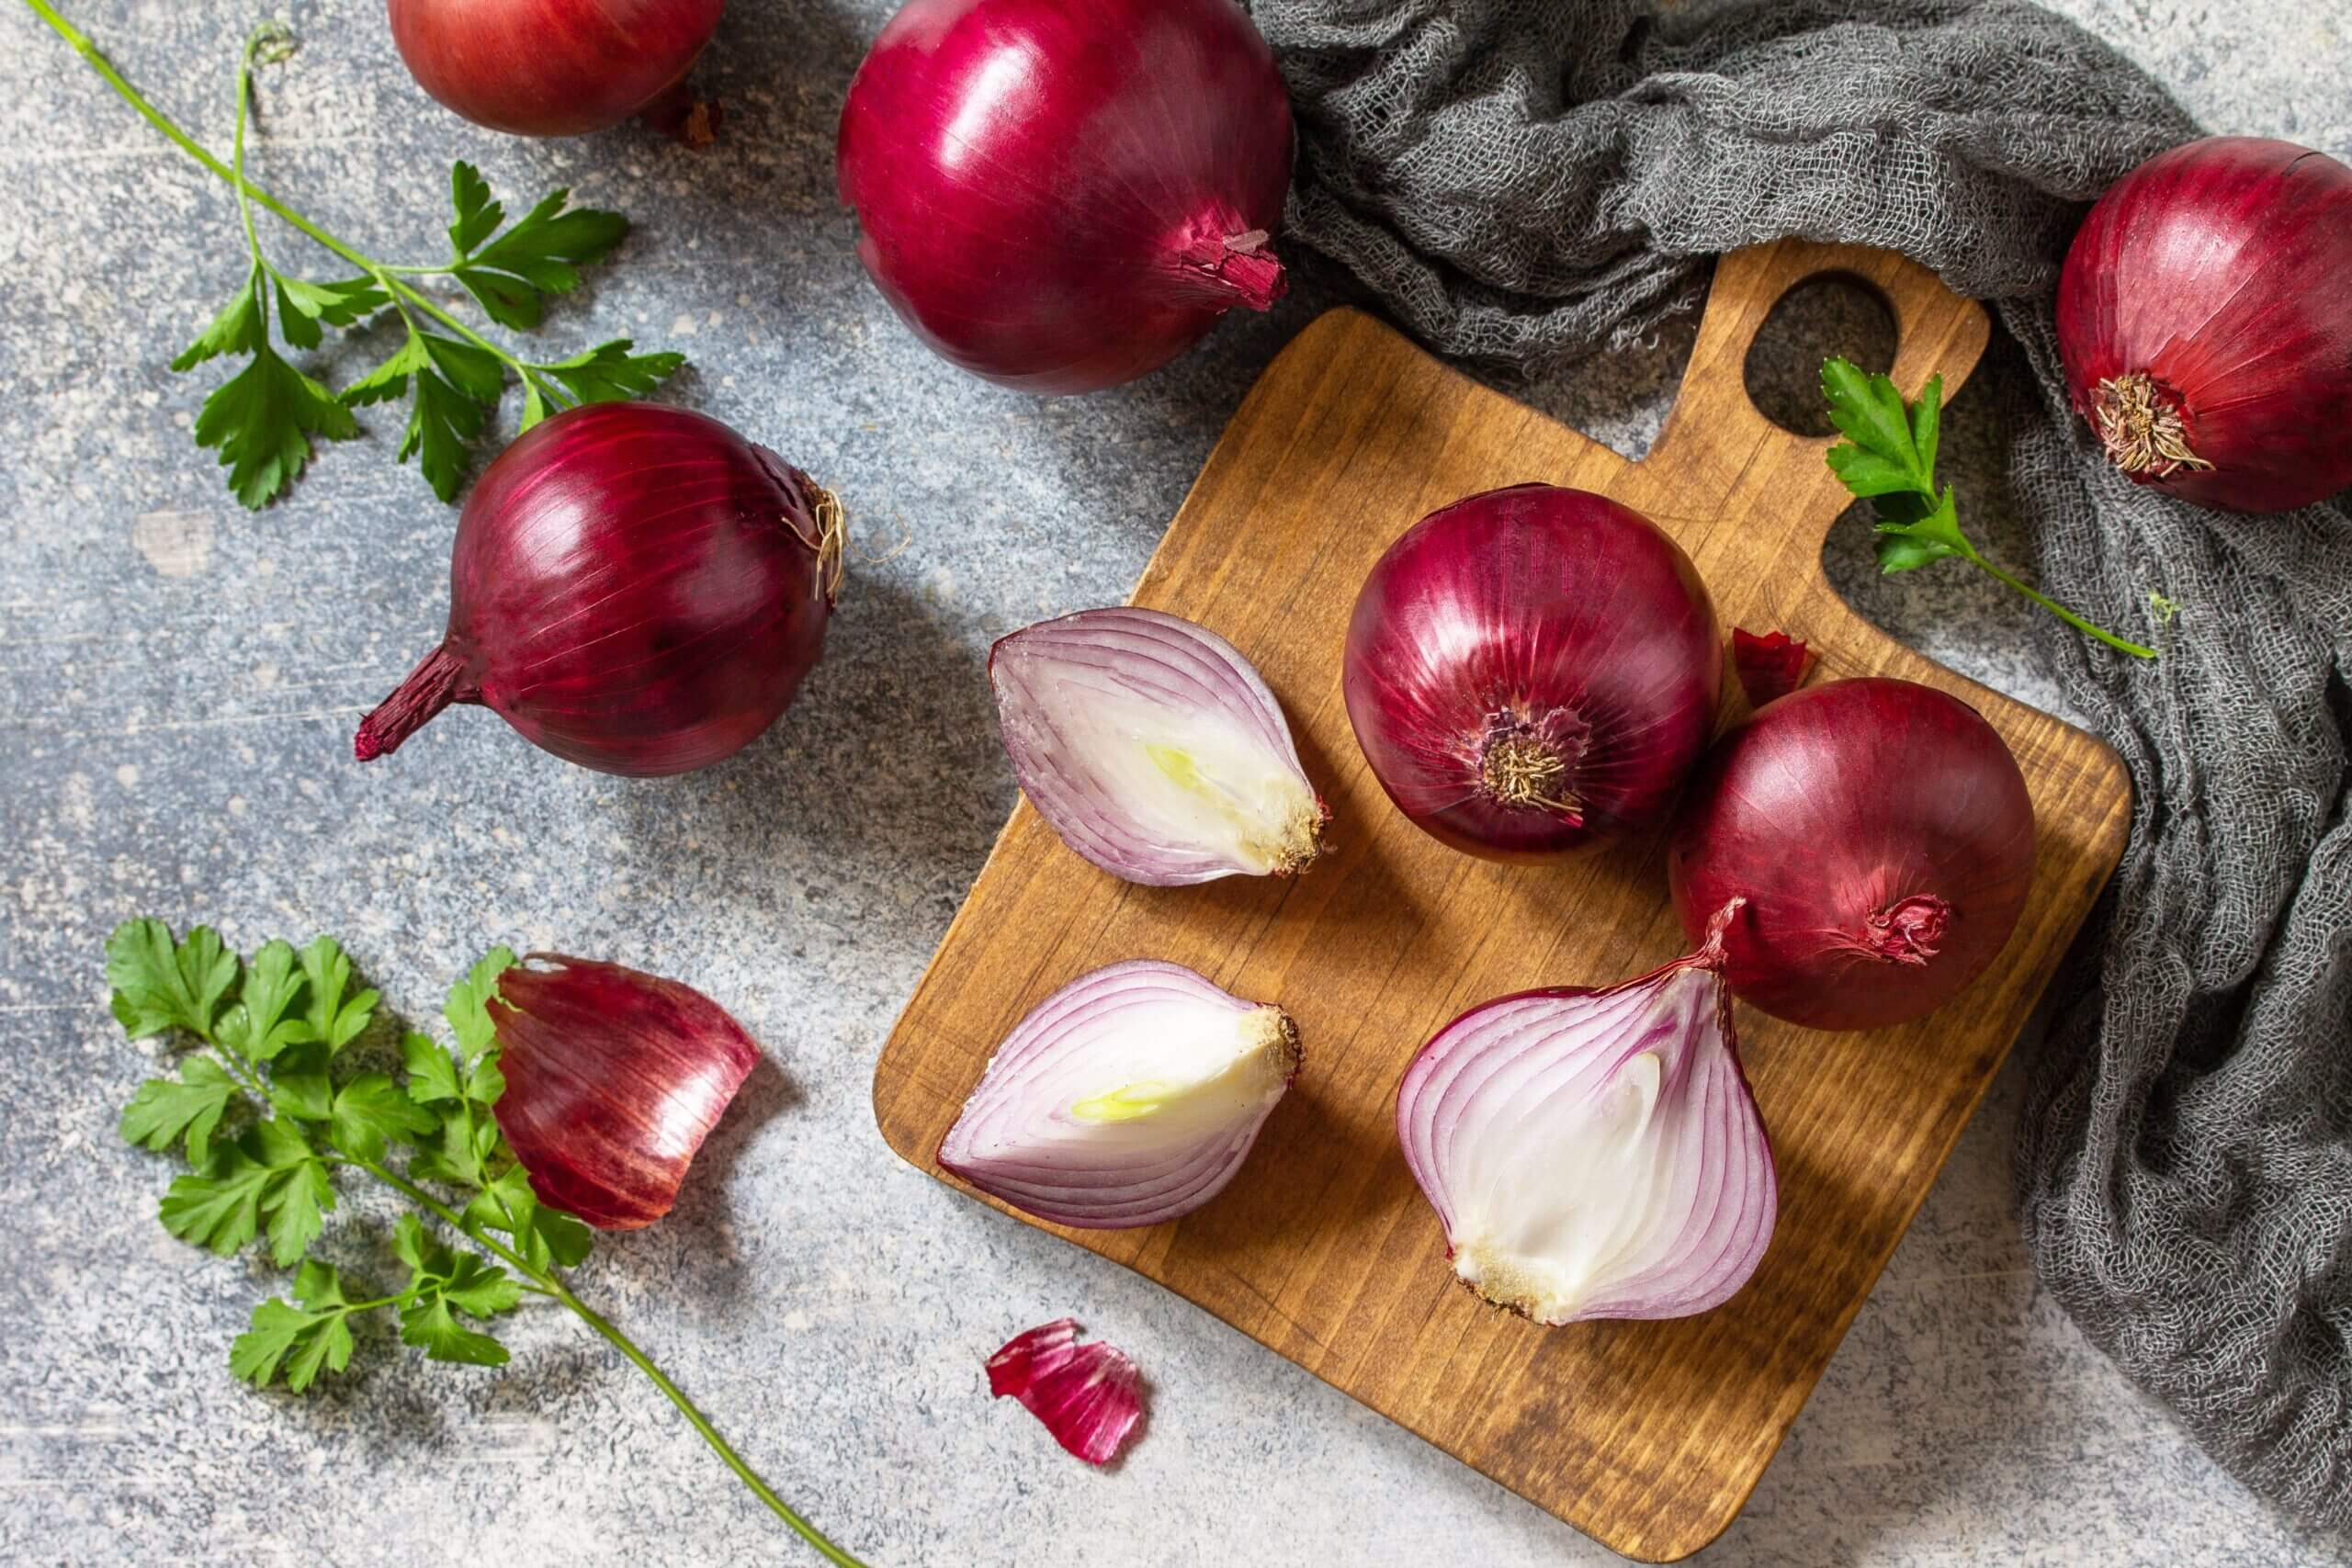 Benefits of raw onions for your body